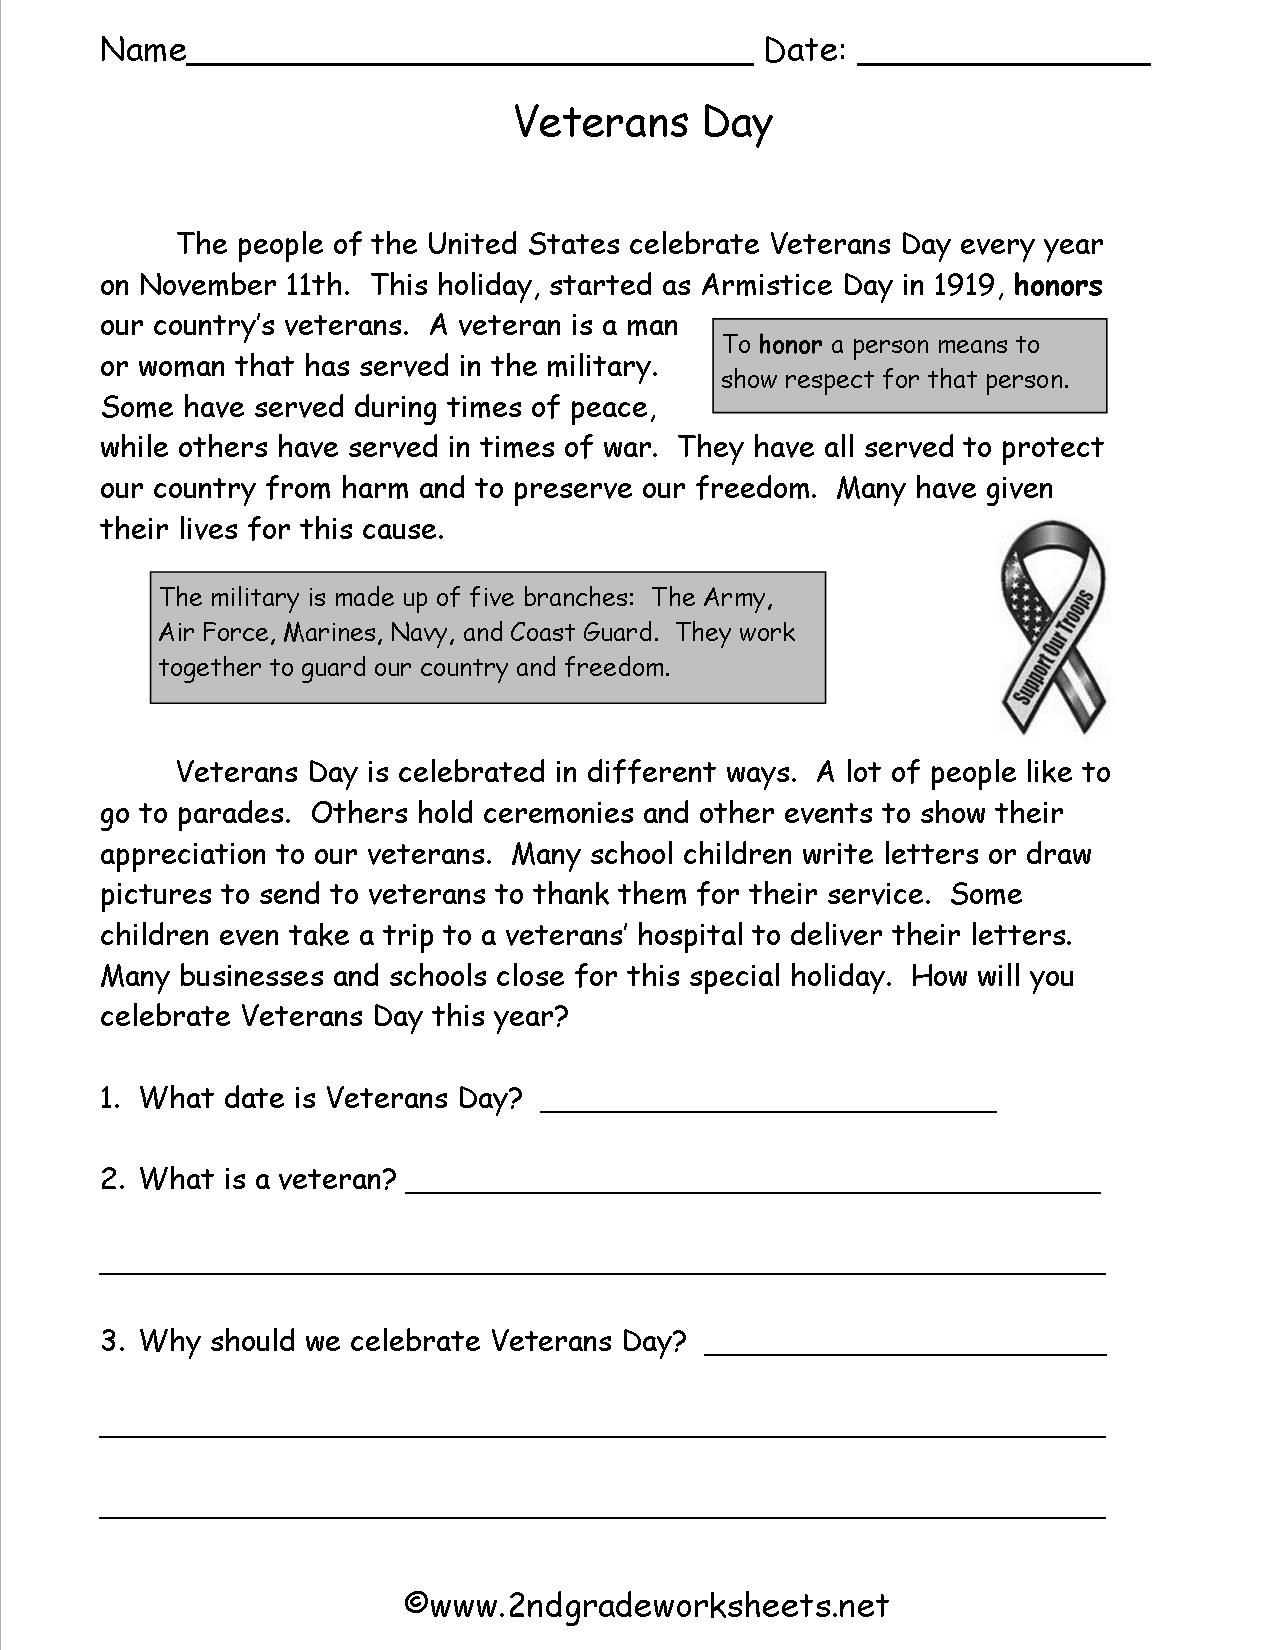 Writing Complete Sentences Worksheets as Well as Veterans Day Worksheets